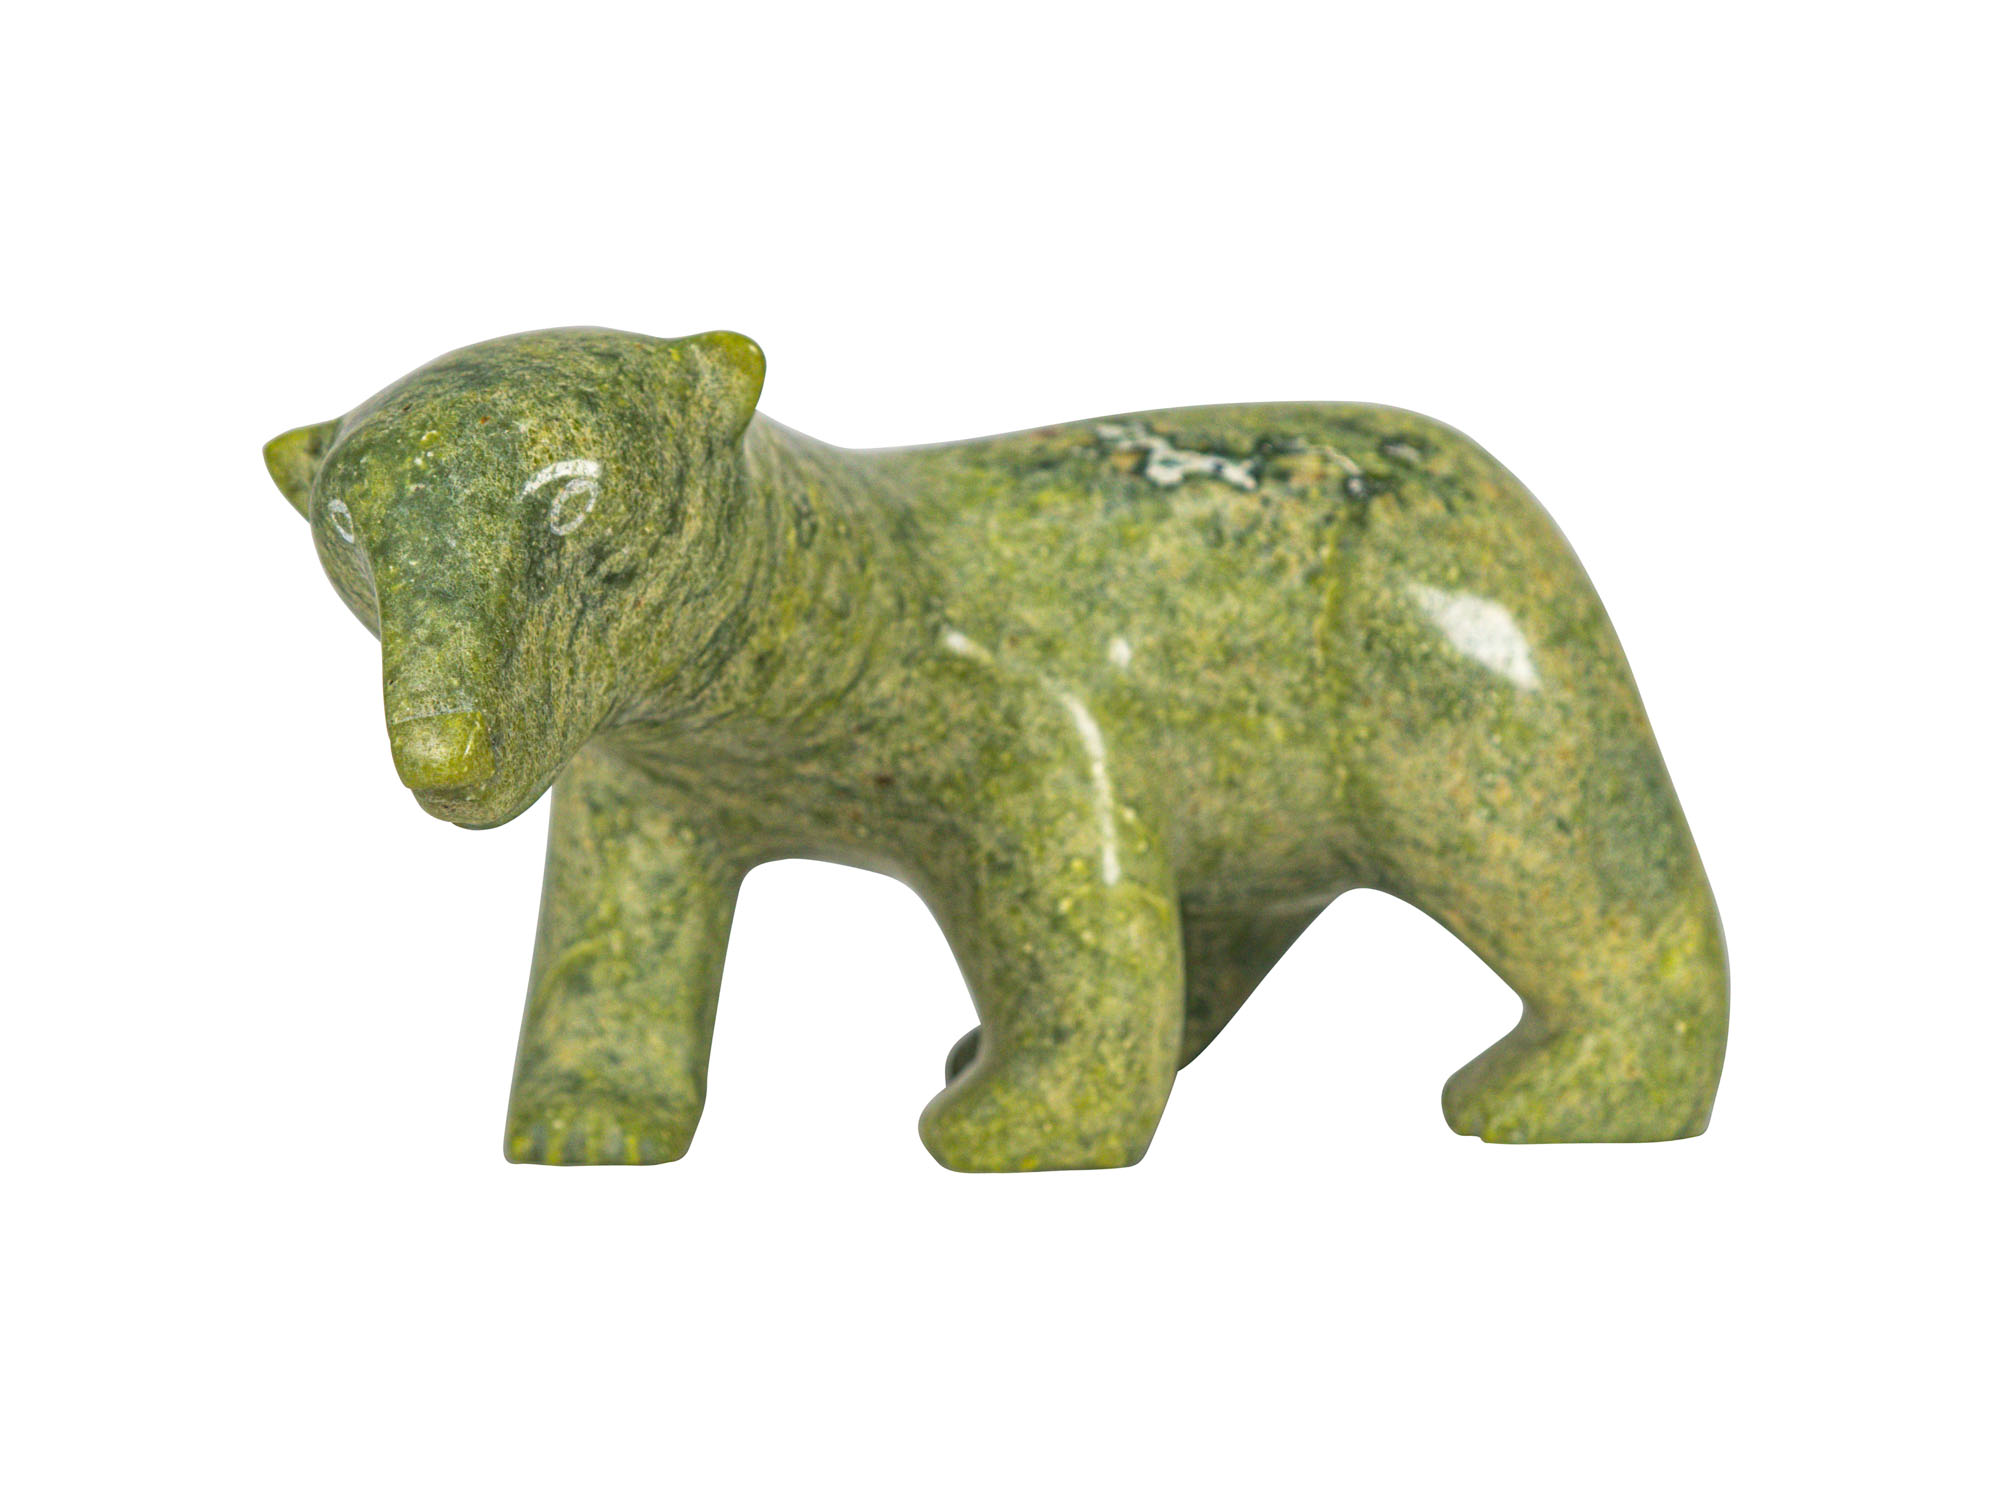 Inuit Soapstone Carving: Bear: Gallery Item 